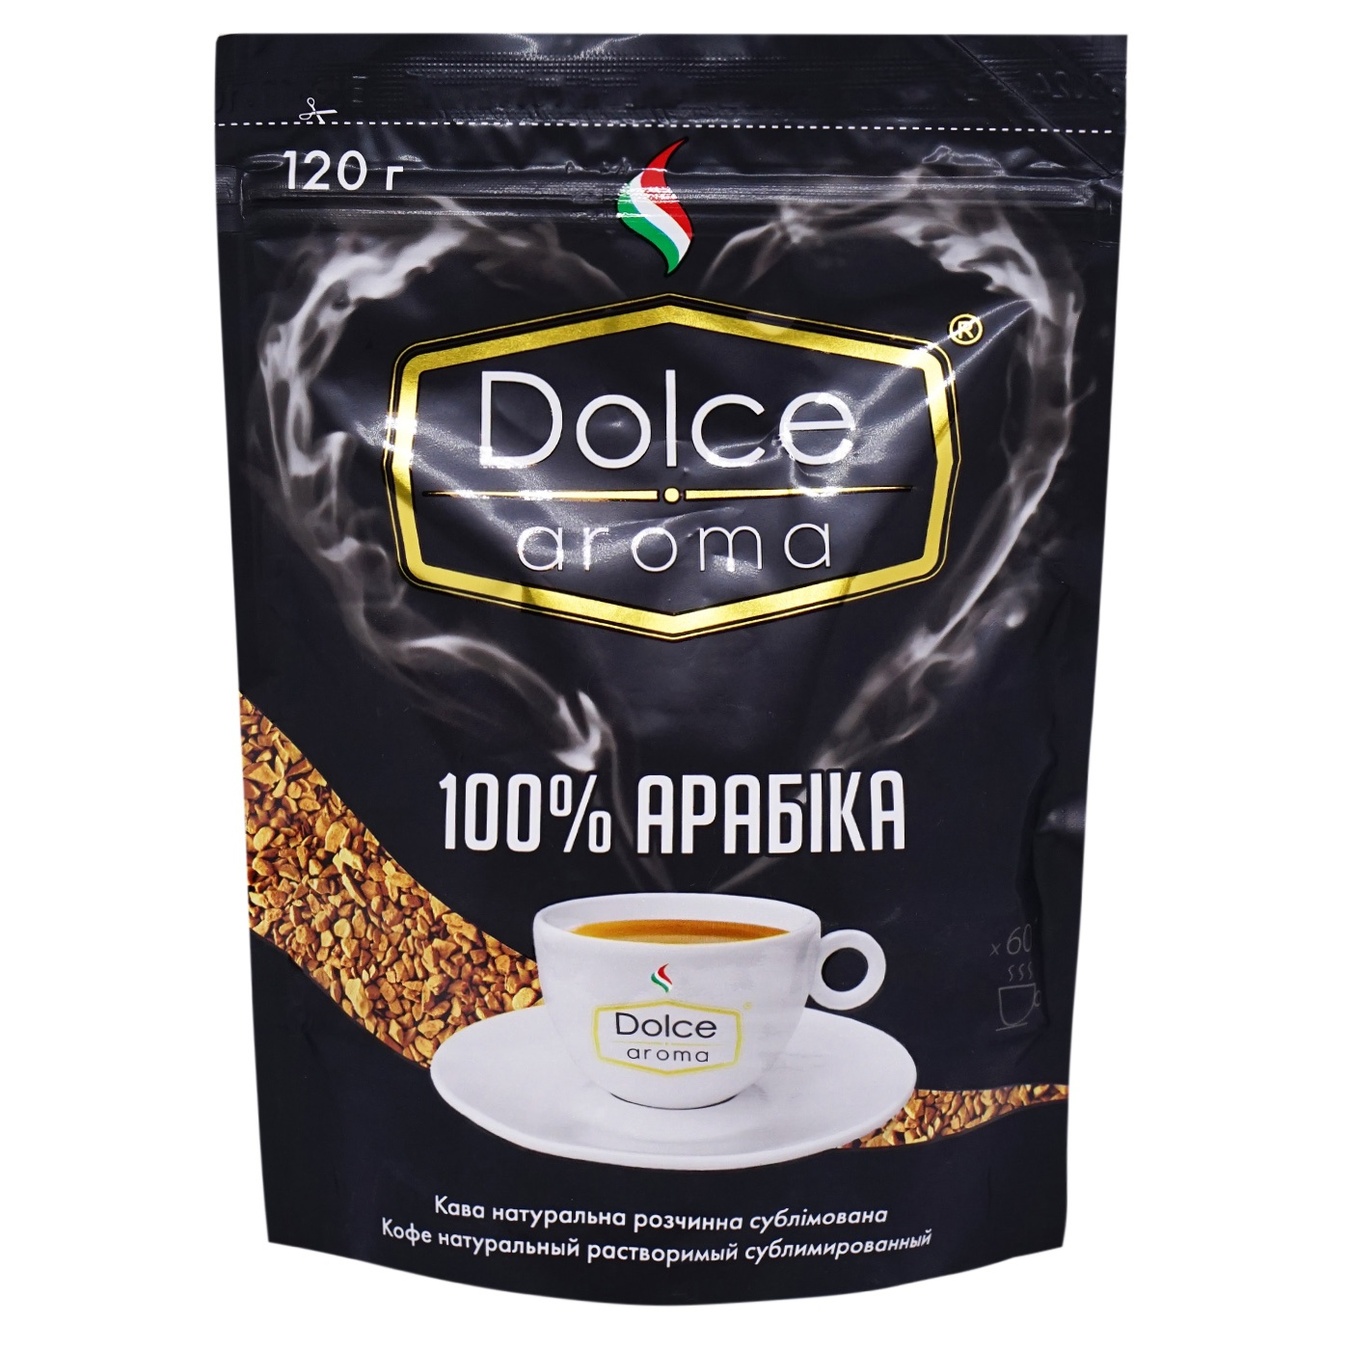 Coffee Dolce Aroma 100% Arabica natural soluble sublimated 120 g